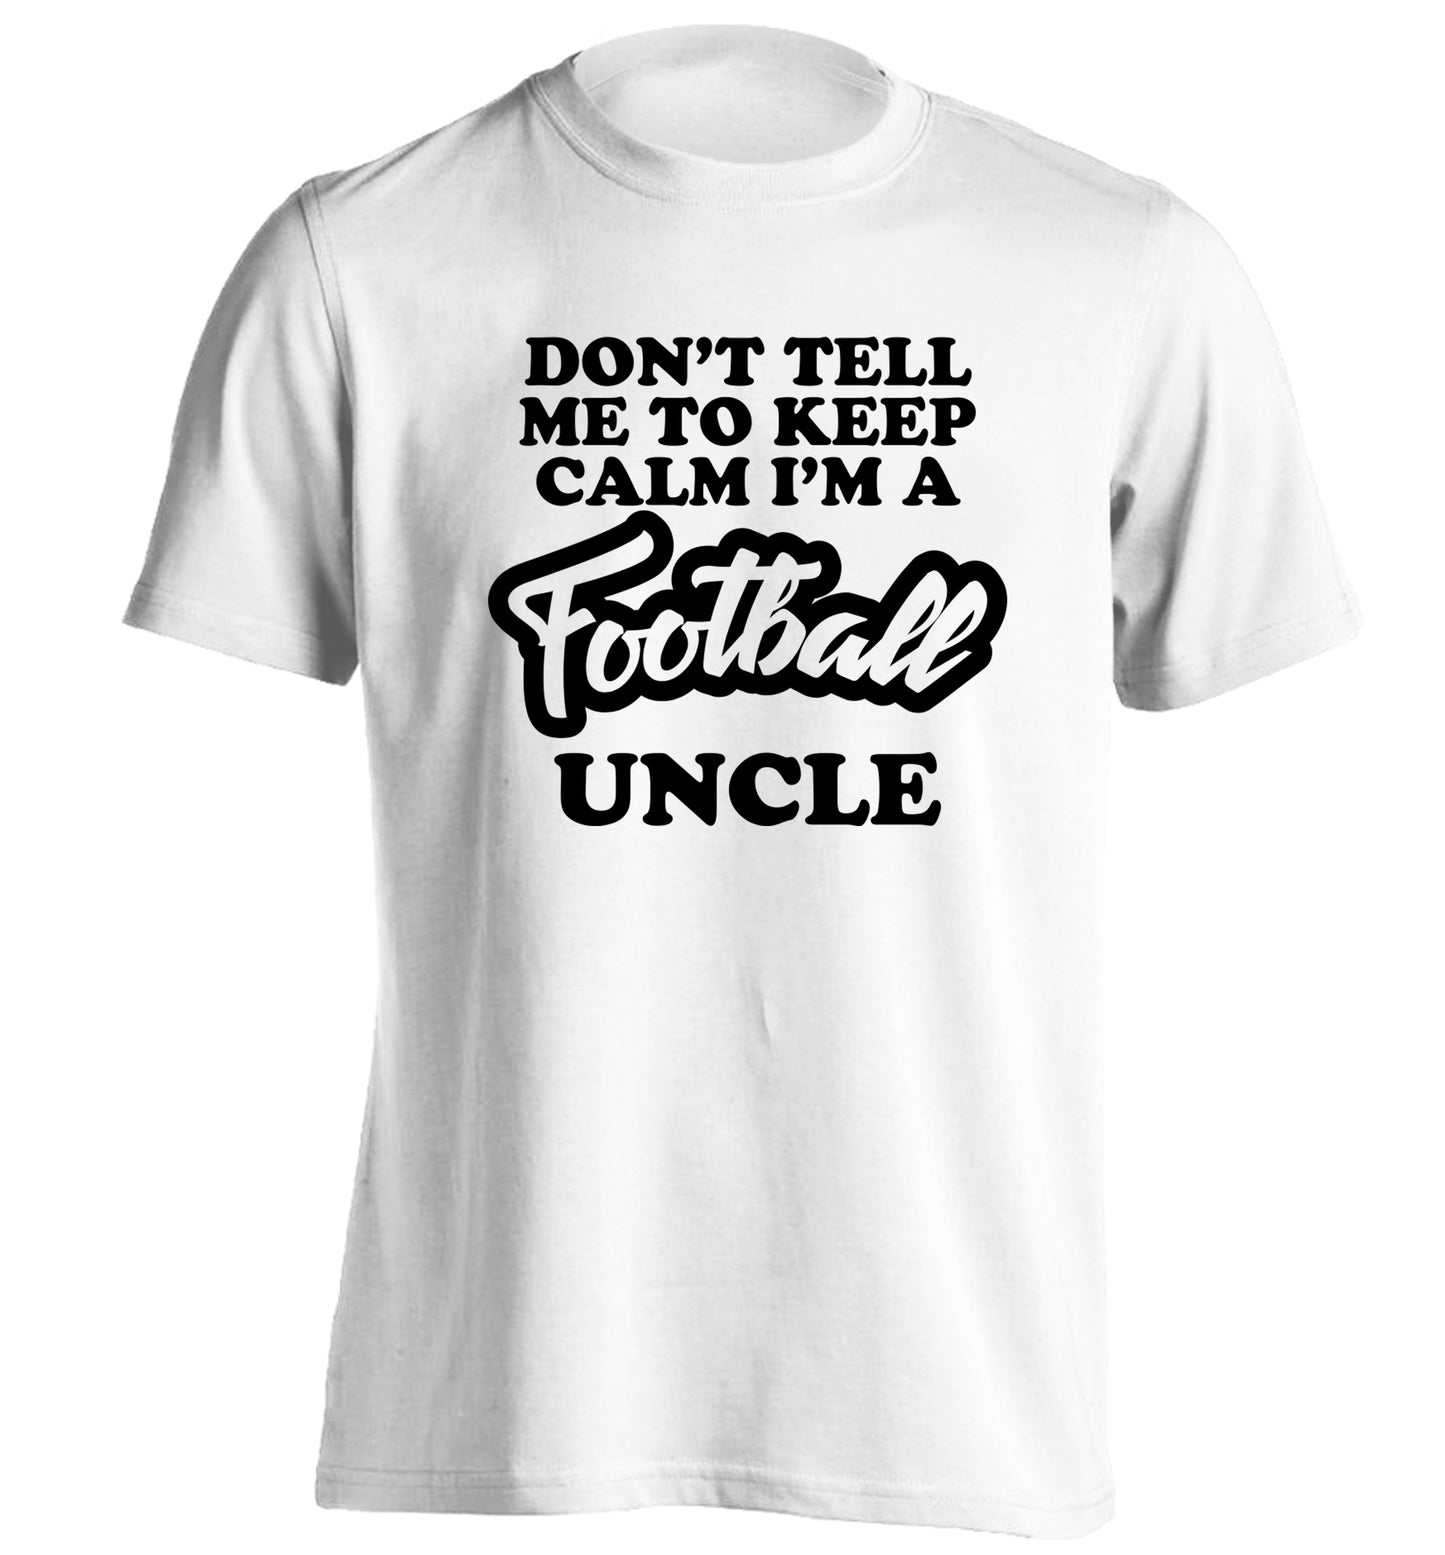 Don't tell me to keep calm I'm a football uncle adults unisexwhite Tshirt 2XL